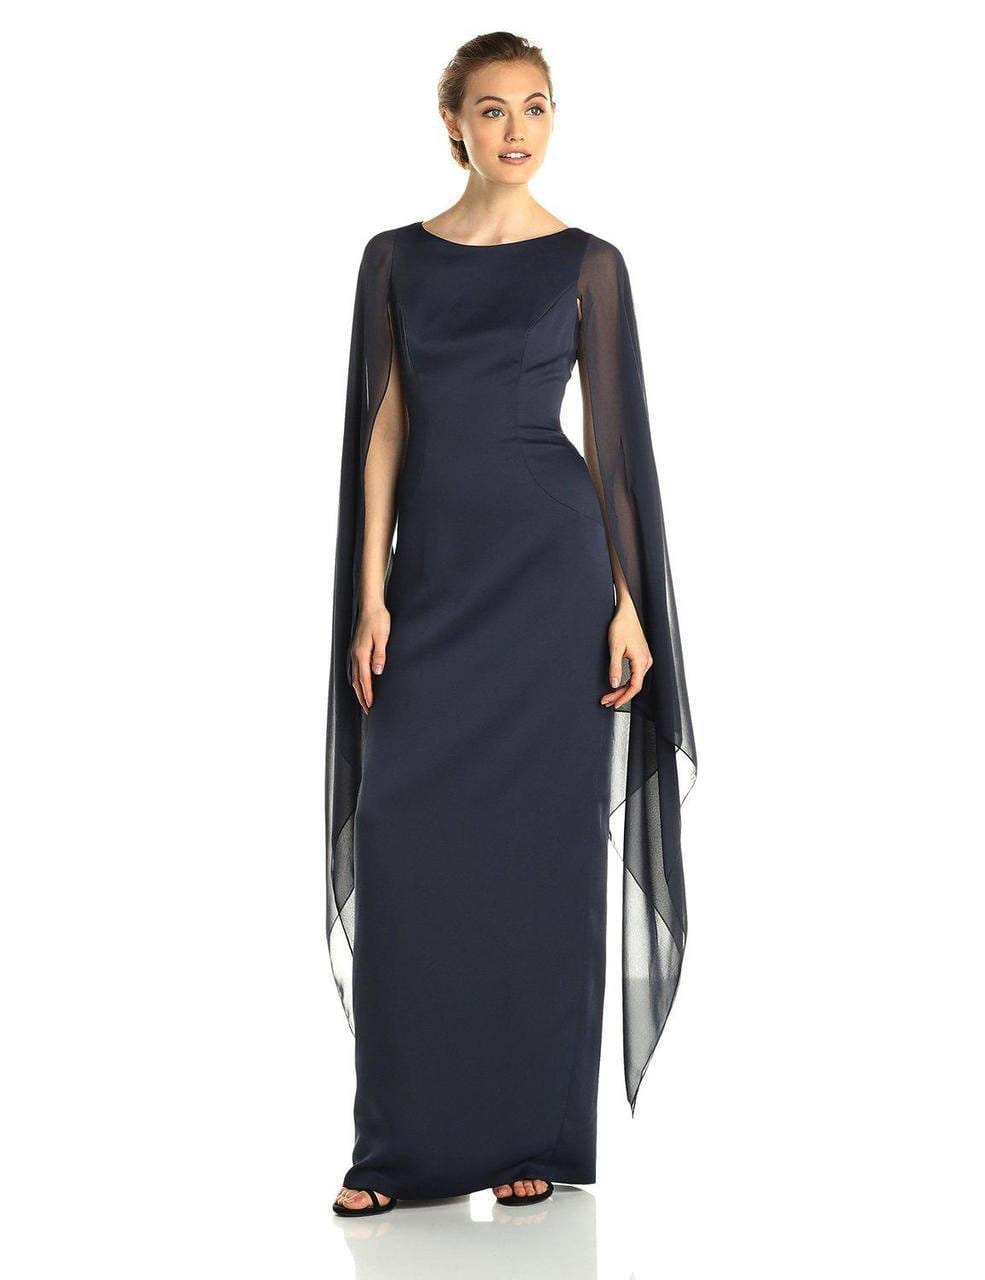 Adrianna Papell - 81917310 Fitted Bateau Dress with Cape
